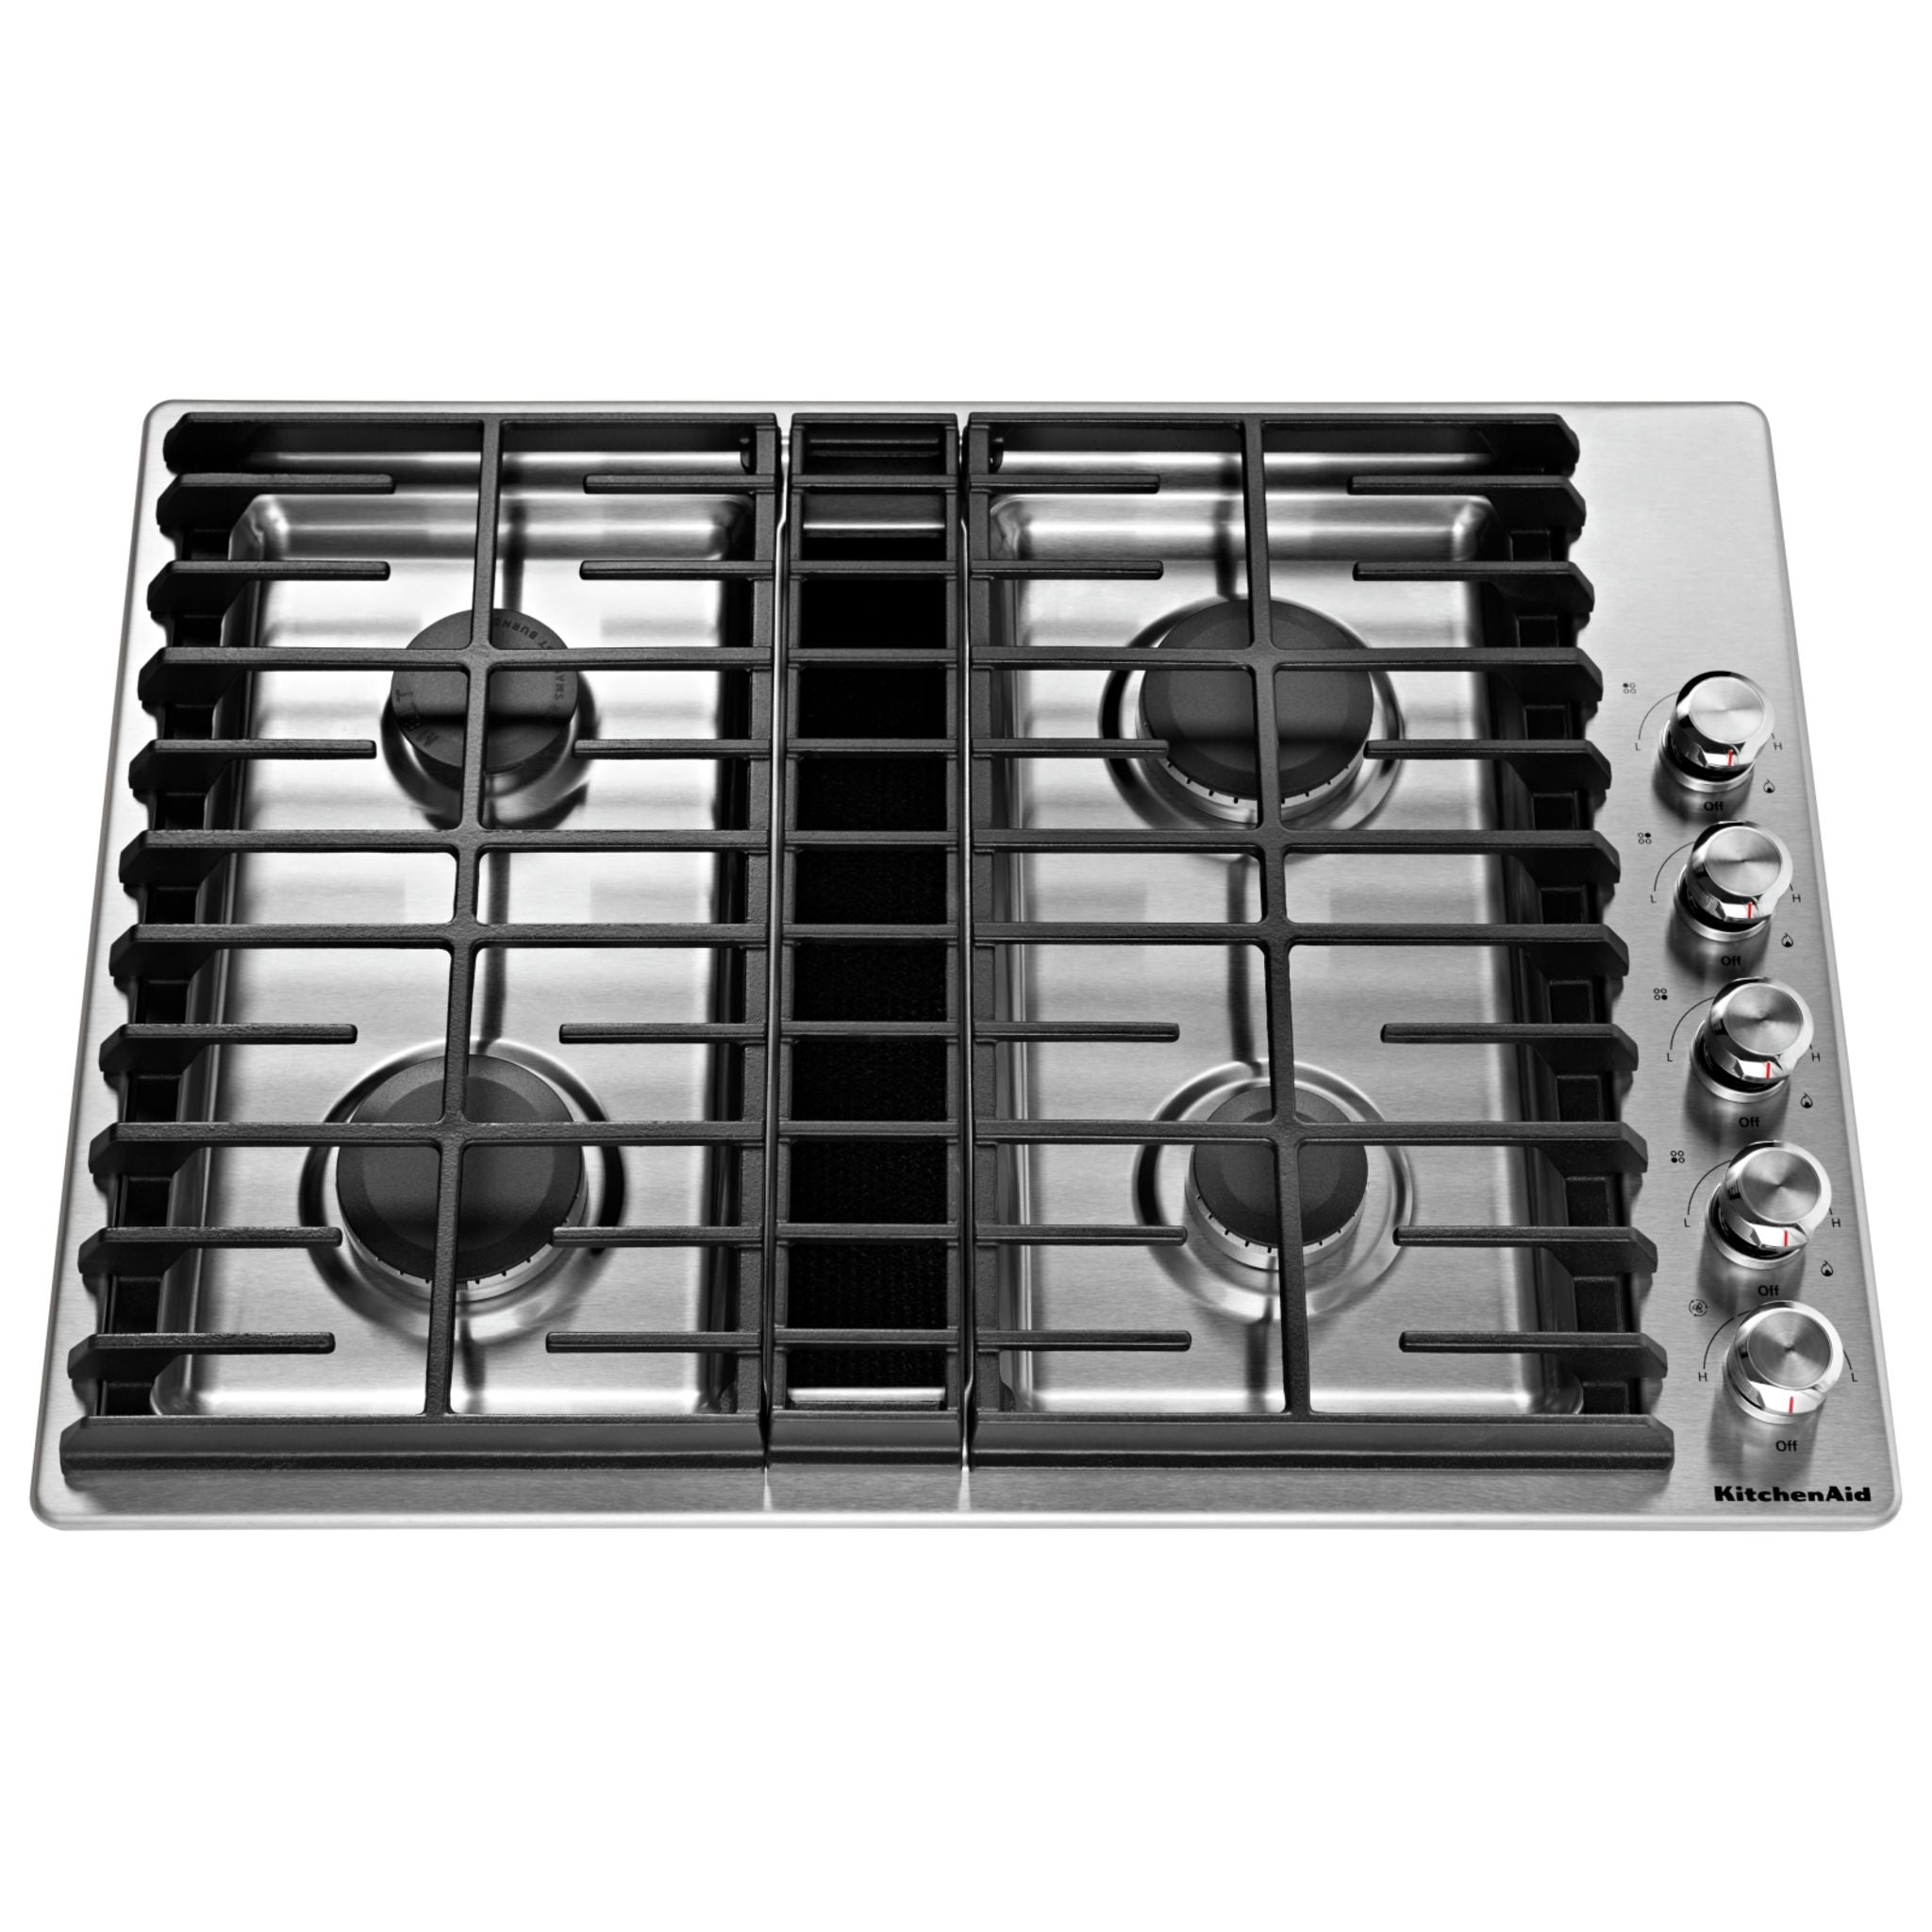 KitchenAid, KitchenAid 30" Cooktop (KCGD500GSS) - Stainless Steel